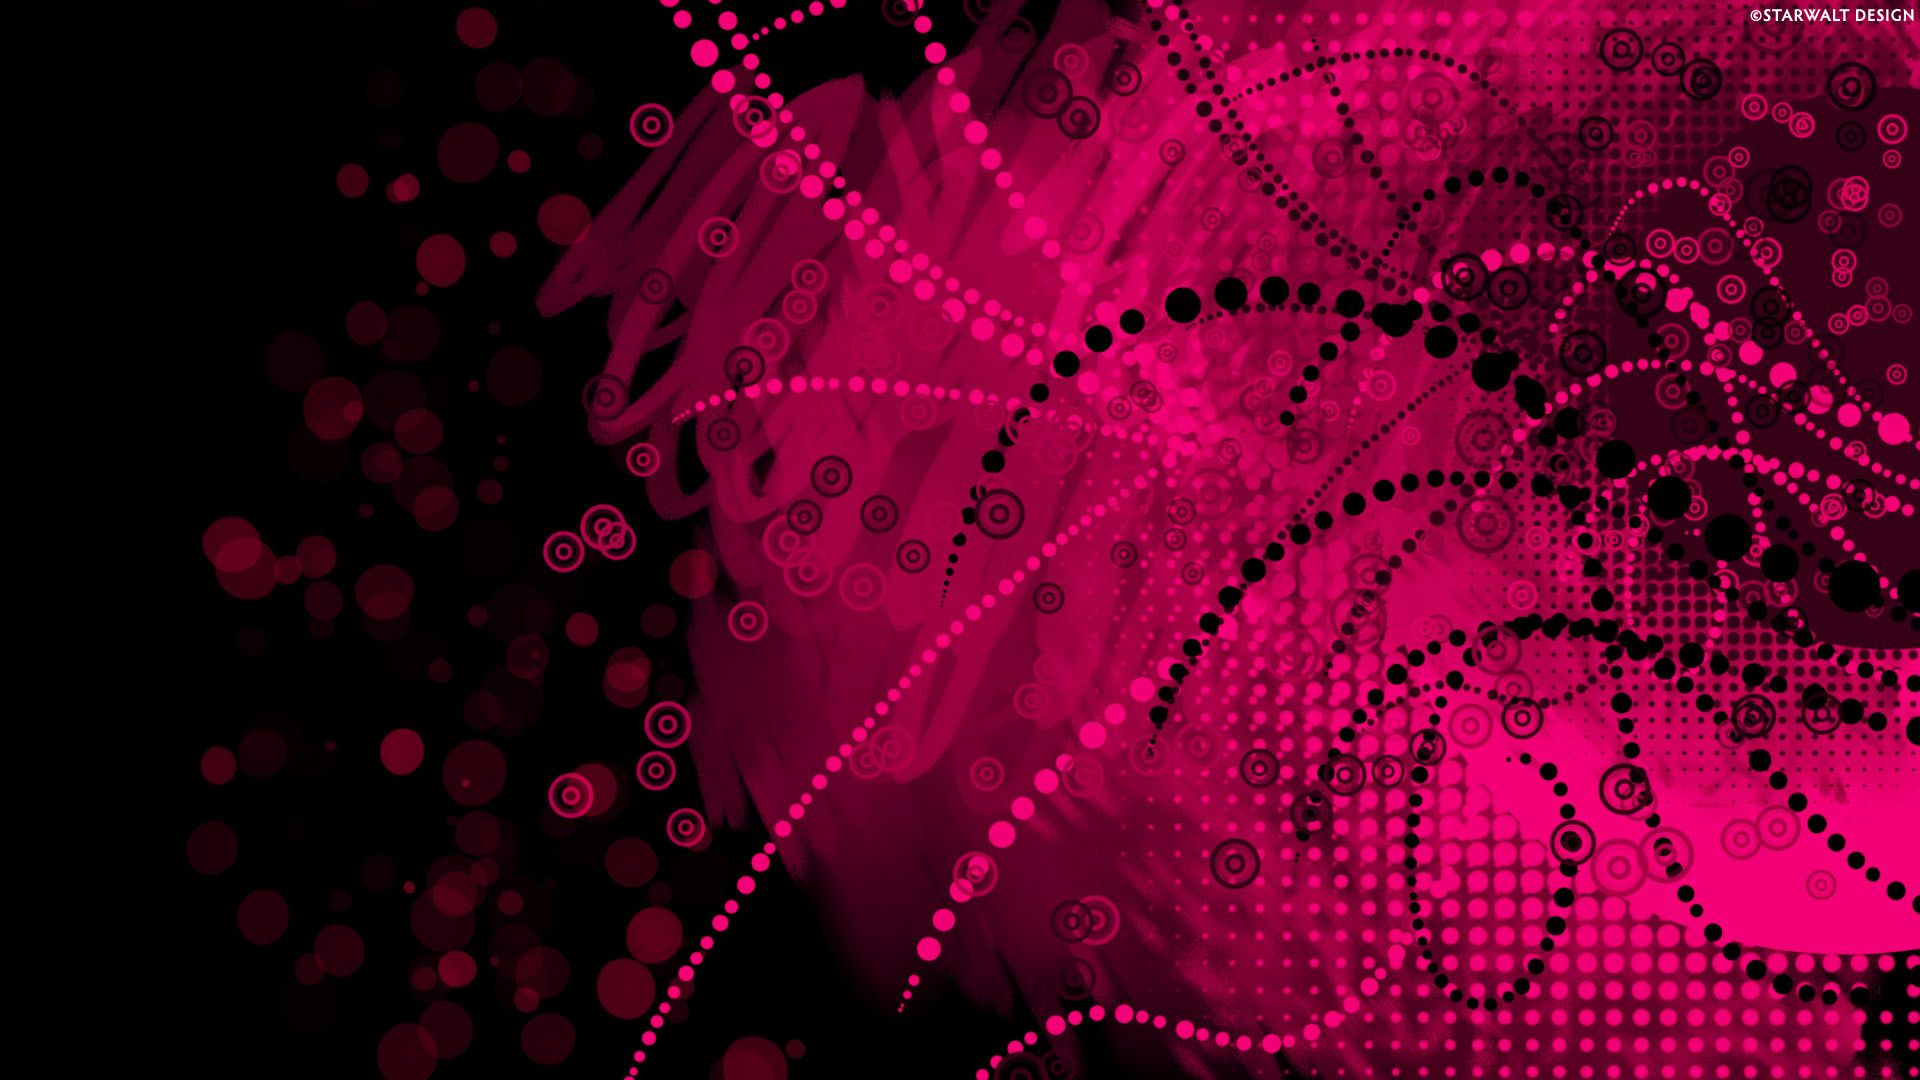 Best Pink Color HD Wallpaper Free Download For Editing